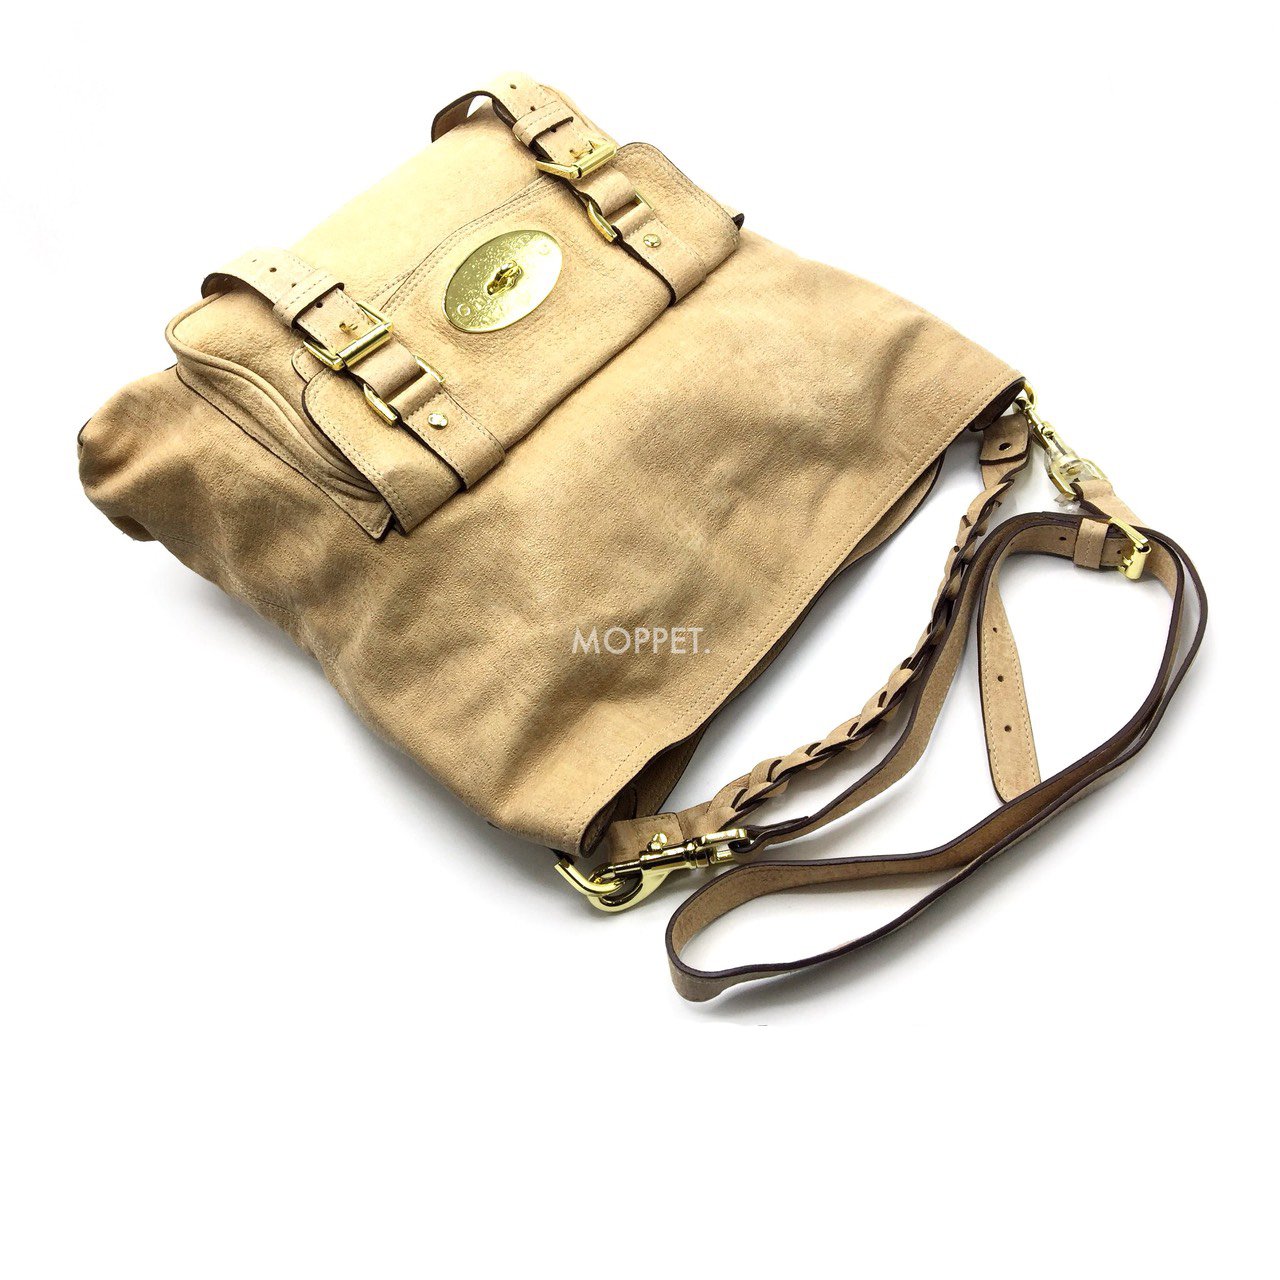 Used Mulberry Alexa Hobo Bag in Beige Leather GHW